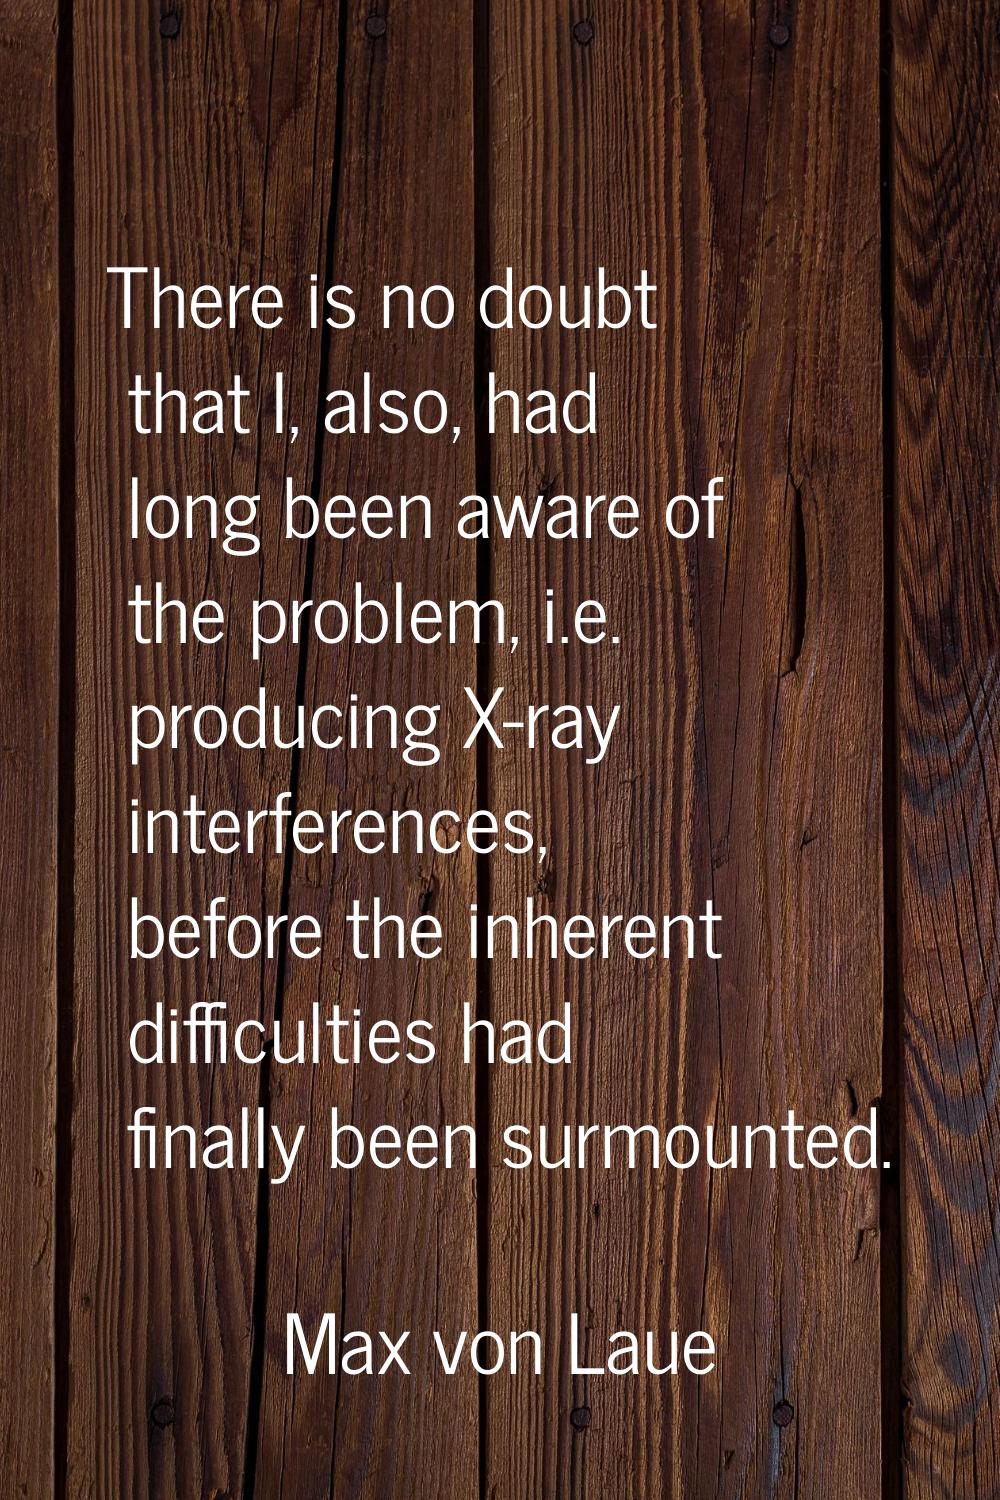 There is no doubt that I, also, had long been aware of the problem, i.e. producing X-ray interferen